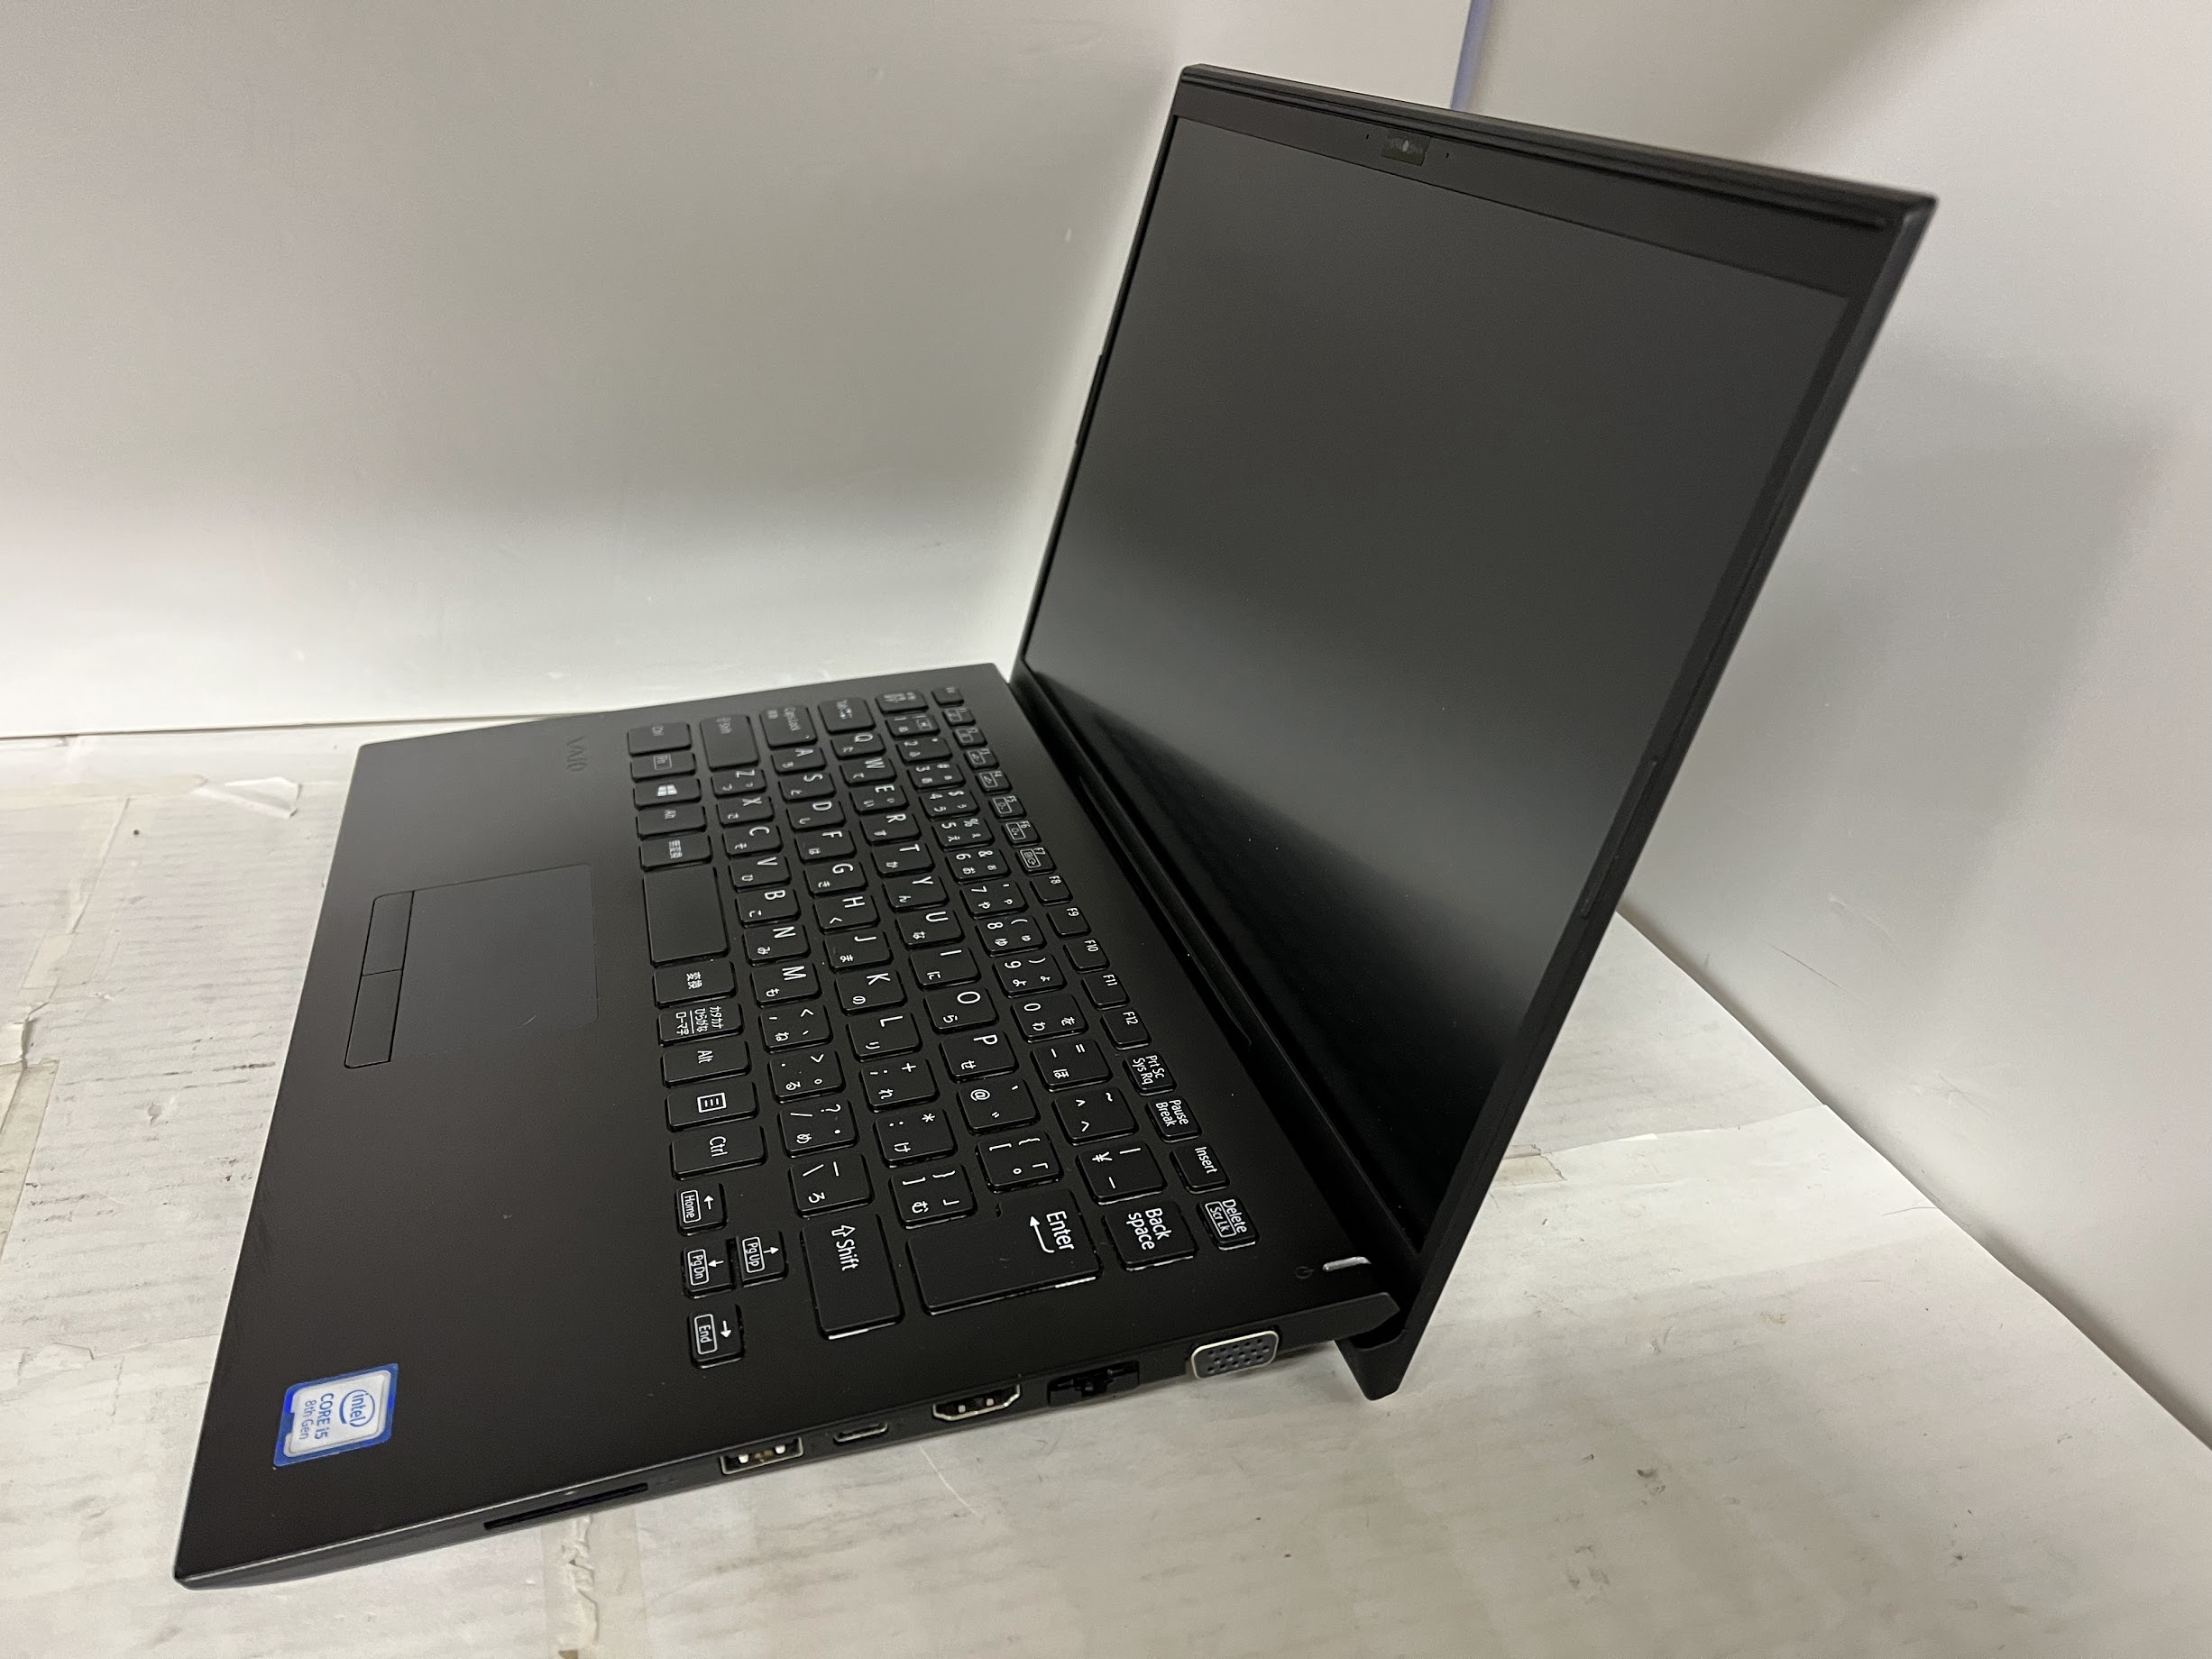 SONY VAIO SVP13 ジャンク　拡張バッテリー